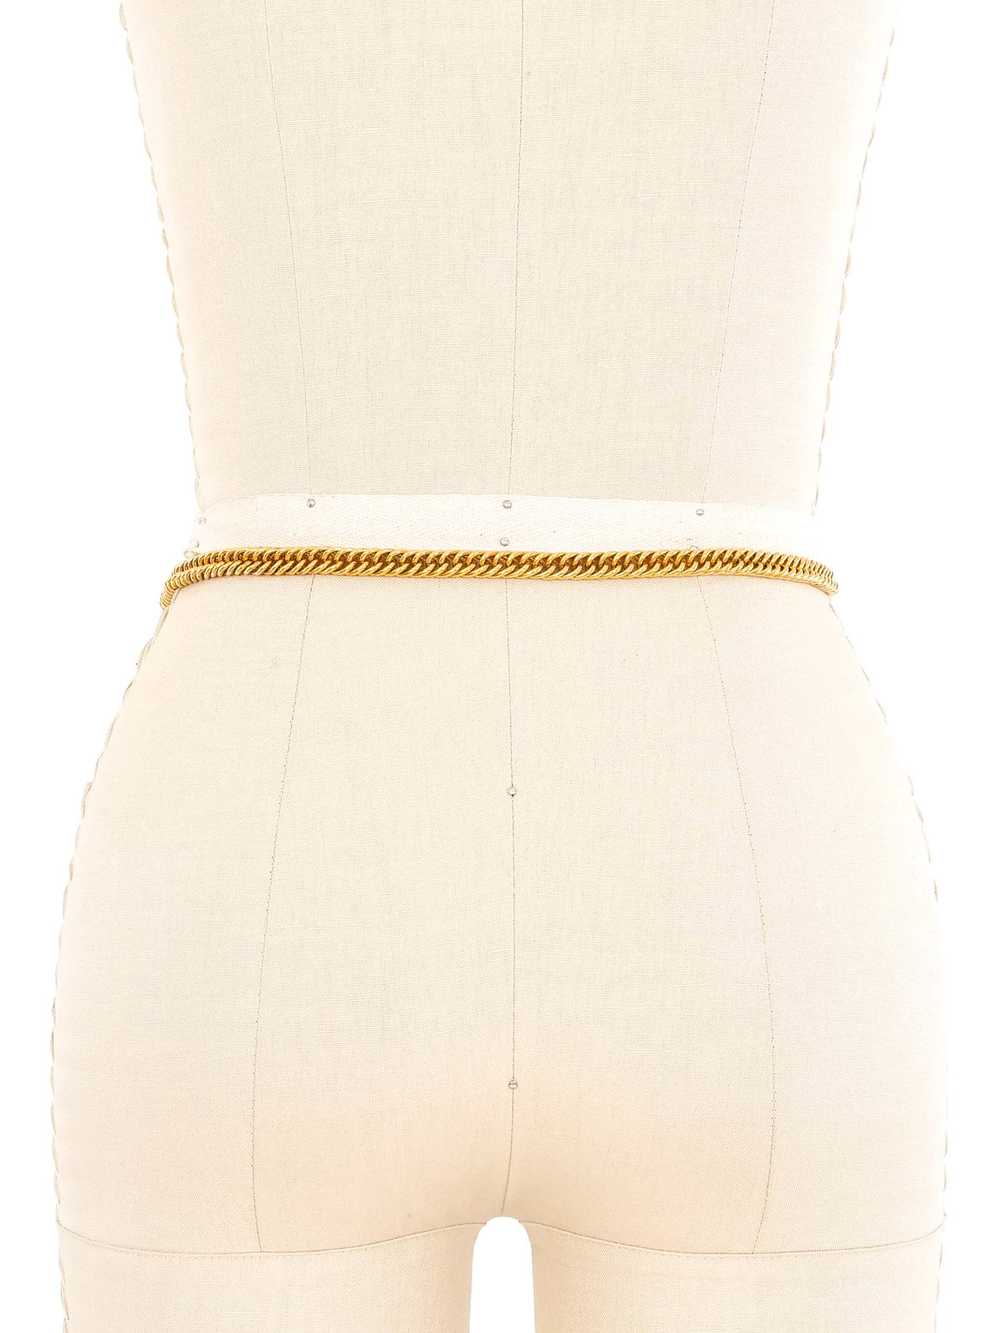 Chanel Quilted Charm Chain Belt - image 2